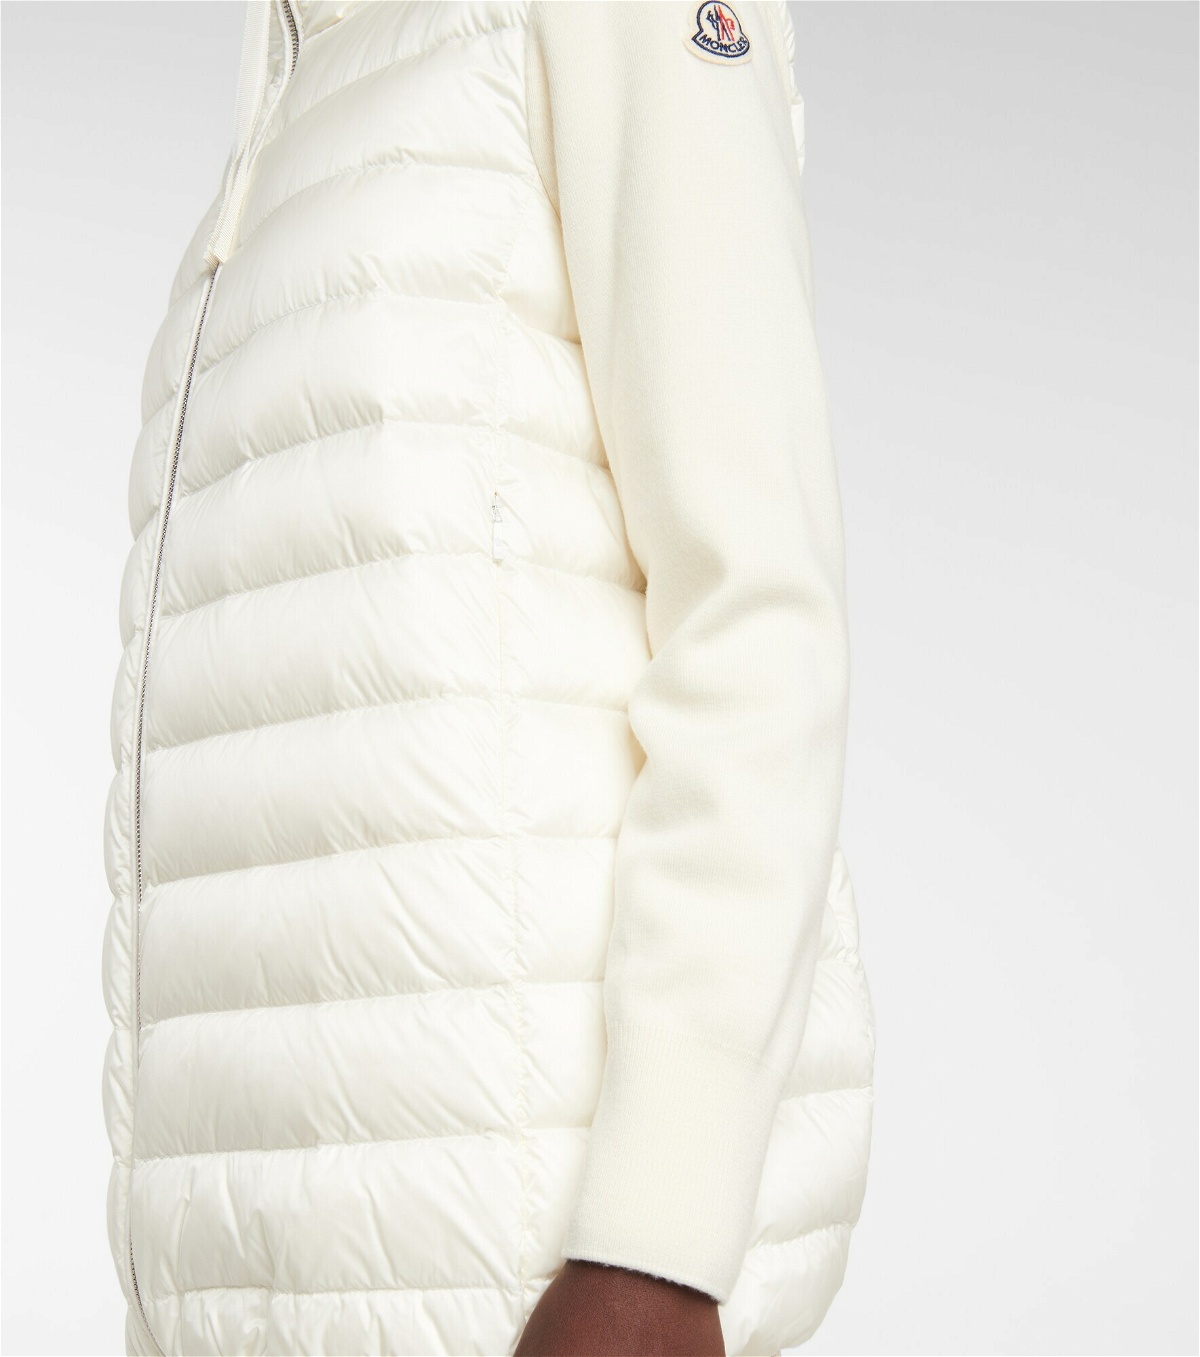 Moncler - Wool and down jacket Moncler